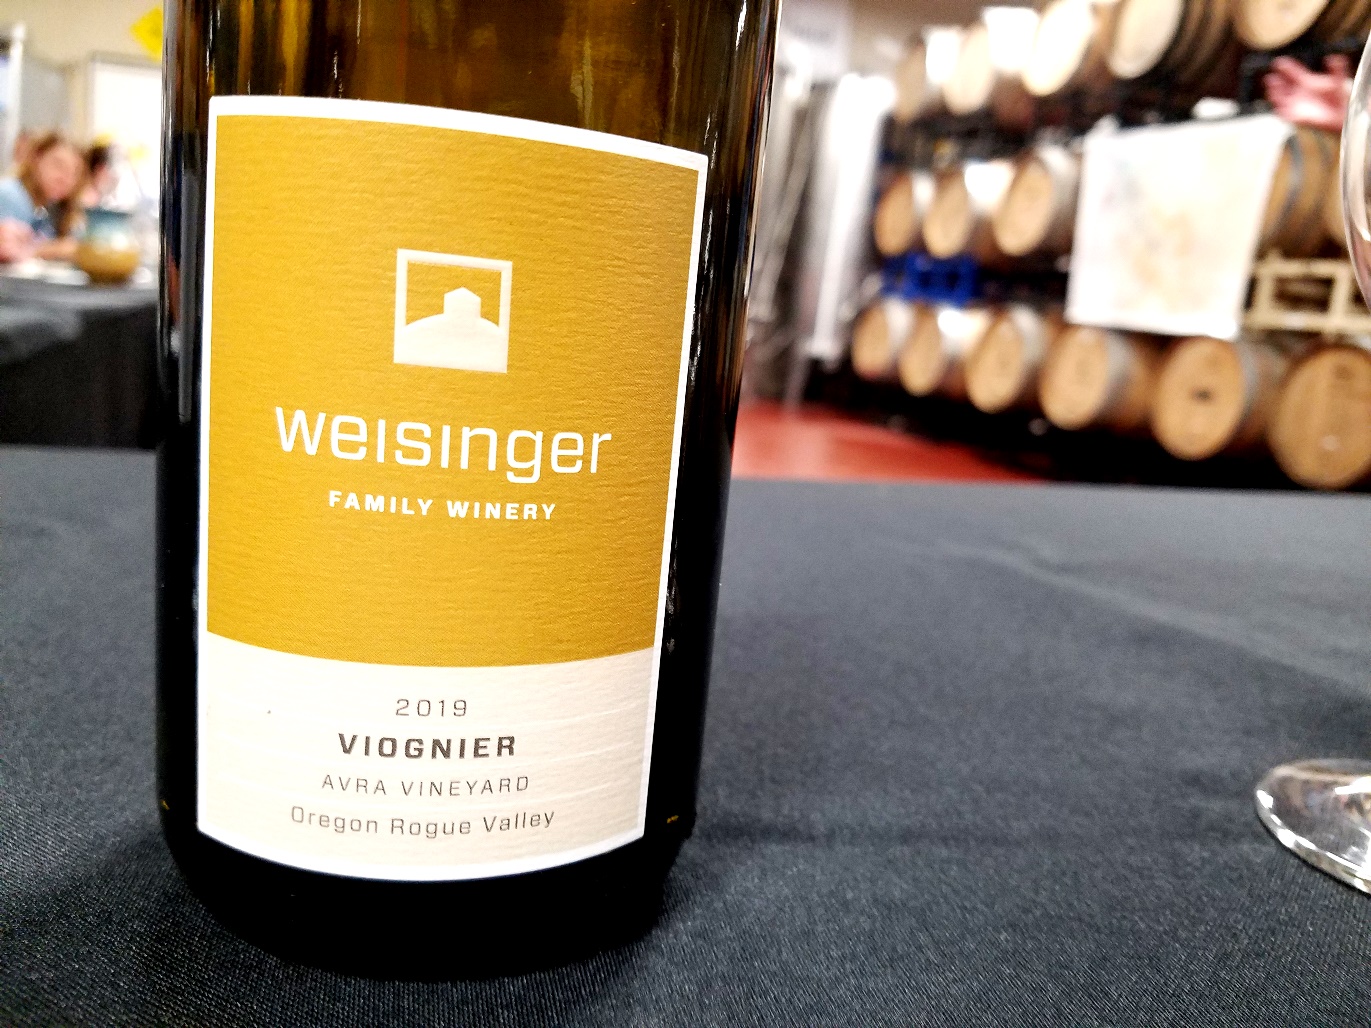 Weisinger Family Winery, Viognier 2019, Avra Vineyard, Rogue Valley, Oregon, Wine Casual